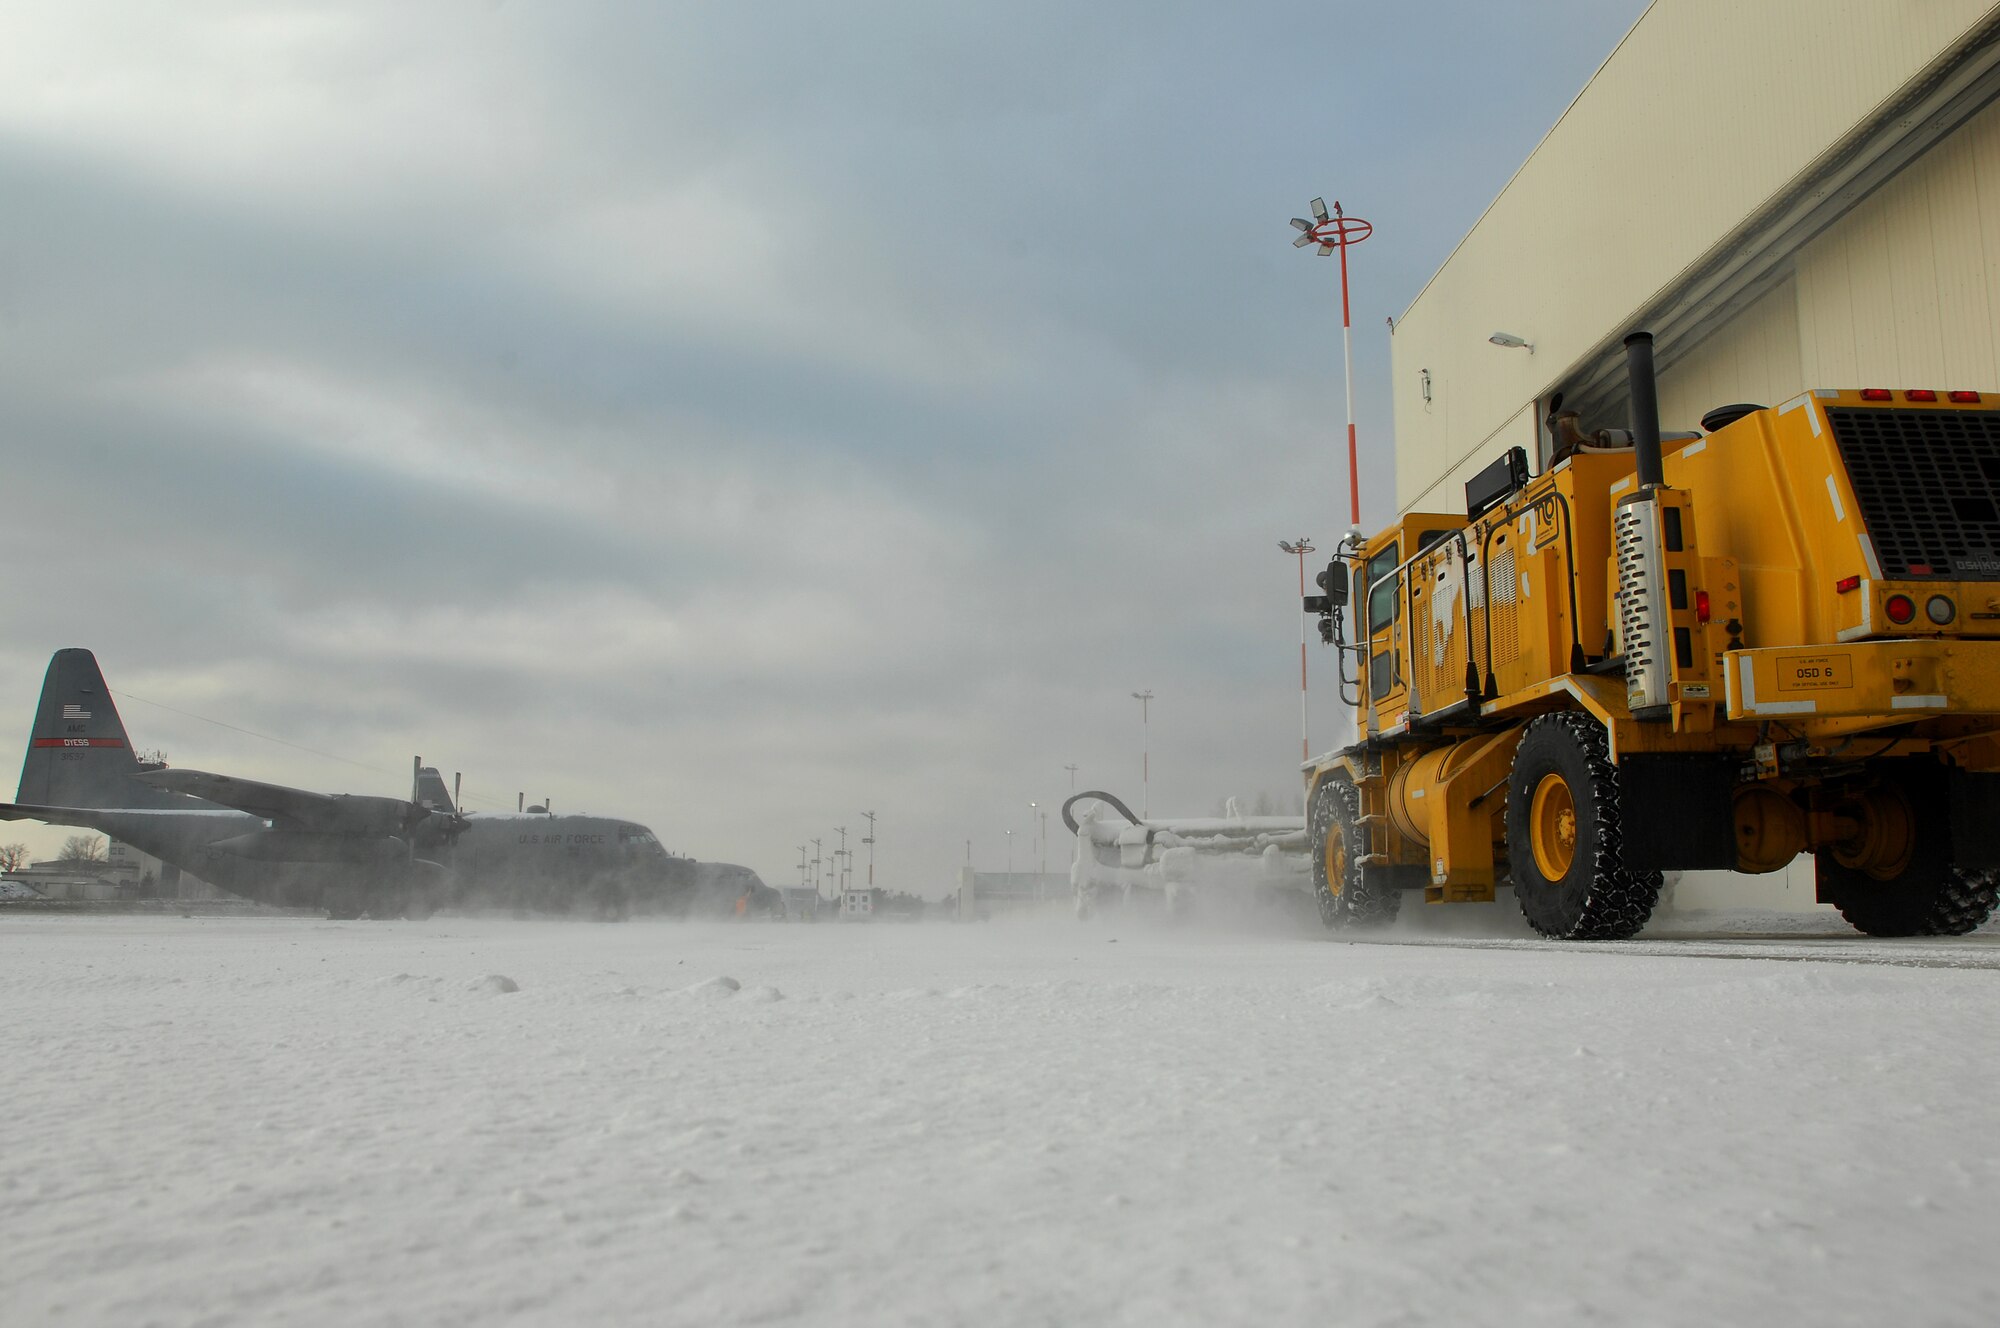 Members of Ramstein Air Field Management use a snow removal truck to clear snow off ramp one Jan. 6, 2008, before the day's mission. (U.S. Air Force photo by Airman 1st Class Kenny Holston)